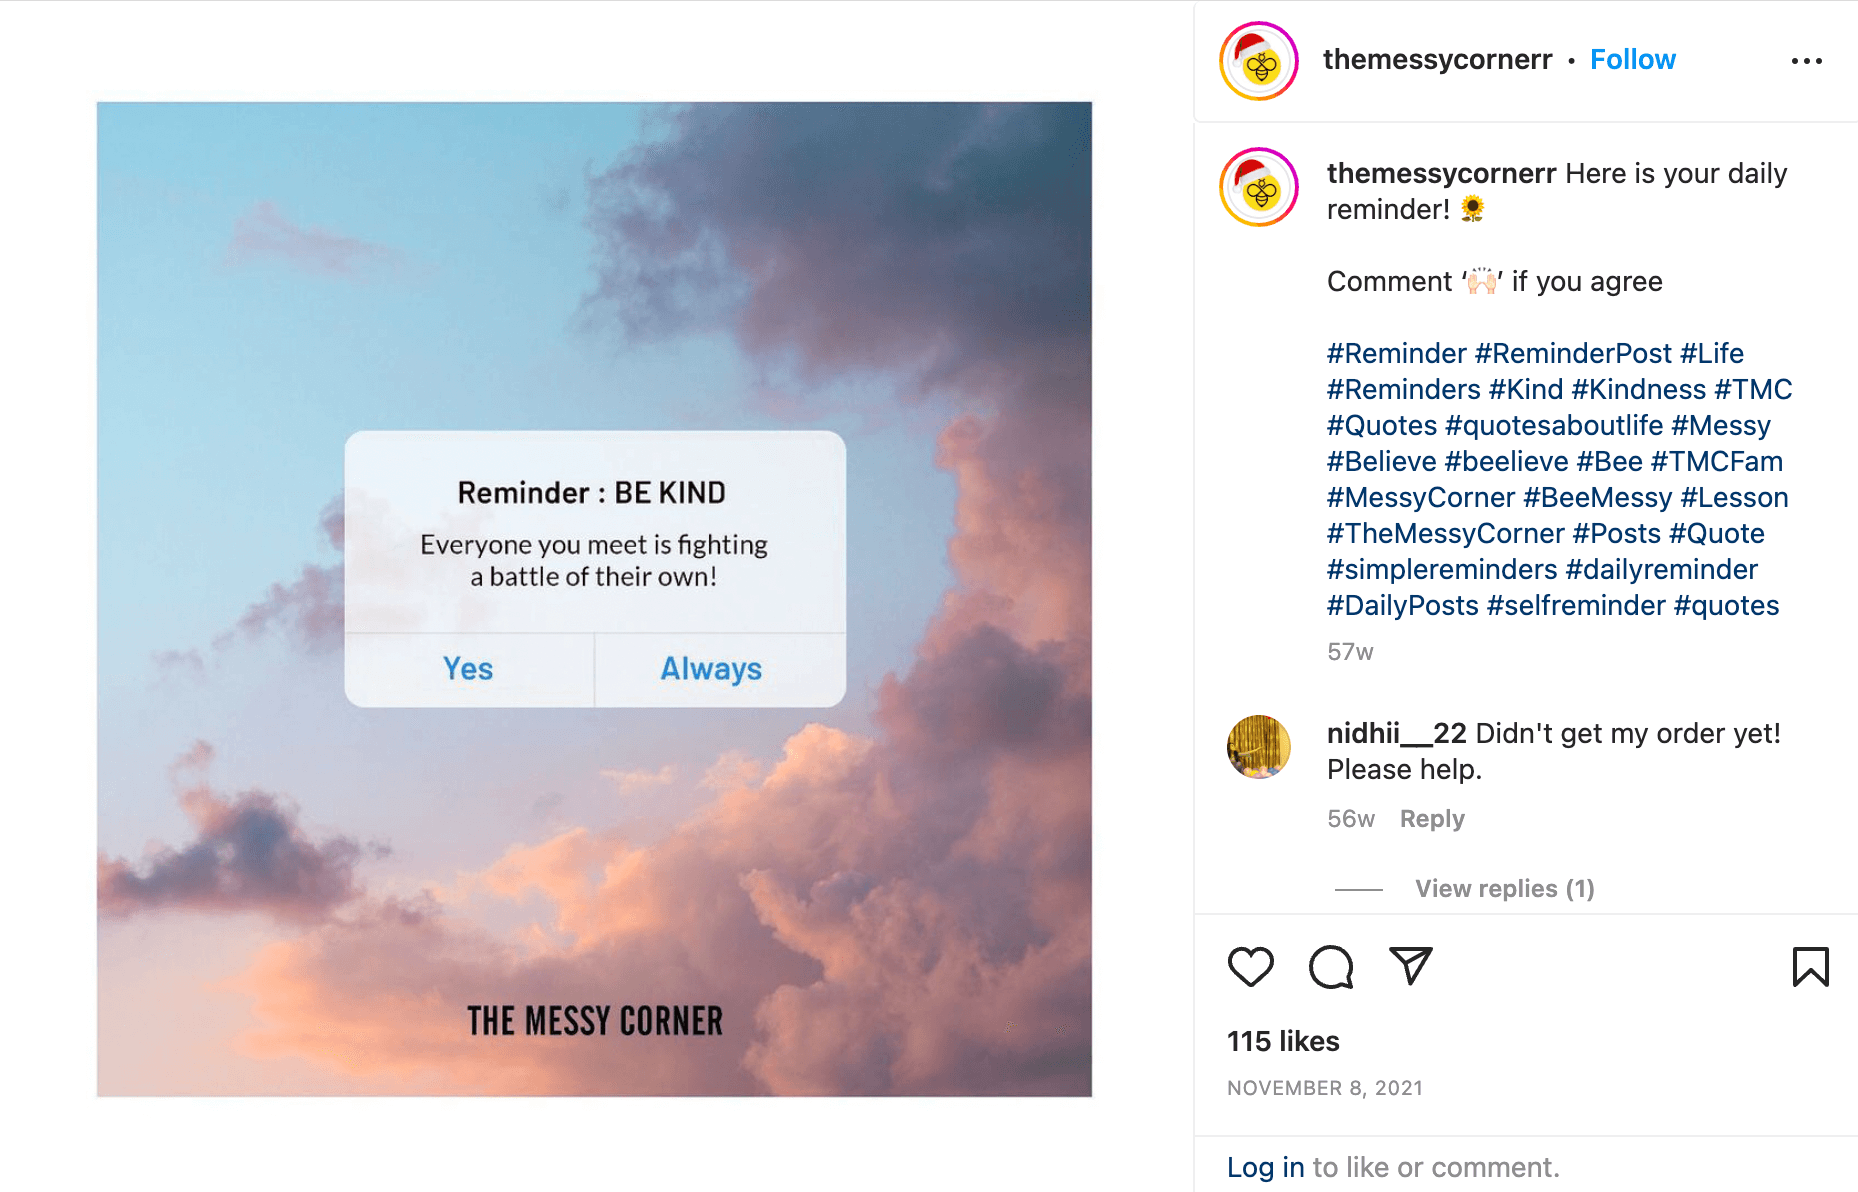 instagram content ideas for business - quote